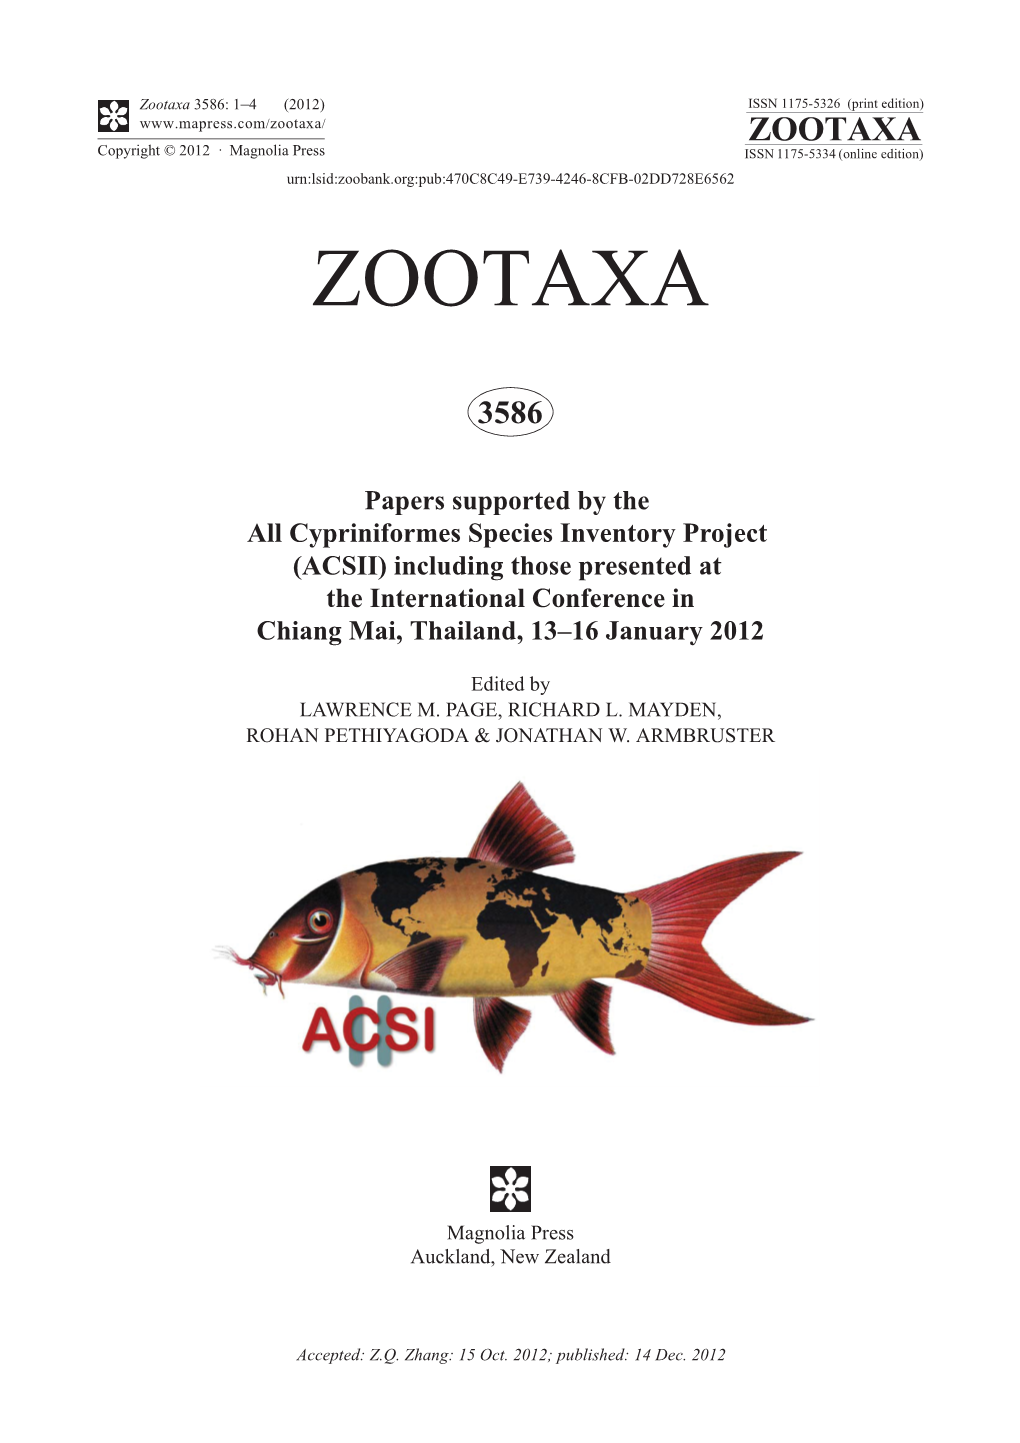 Papers Supported by the All Cypriniformes Species